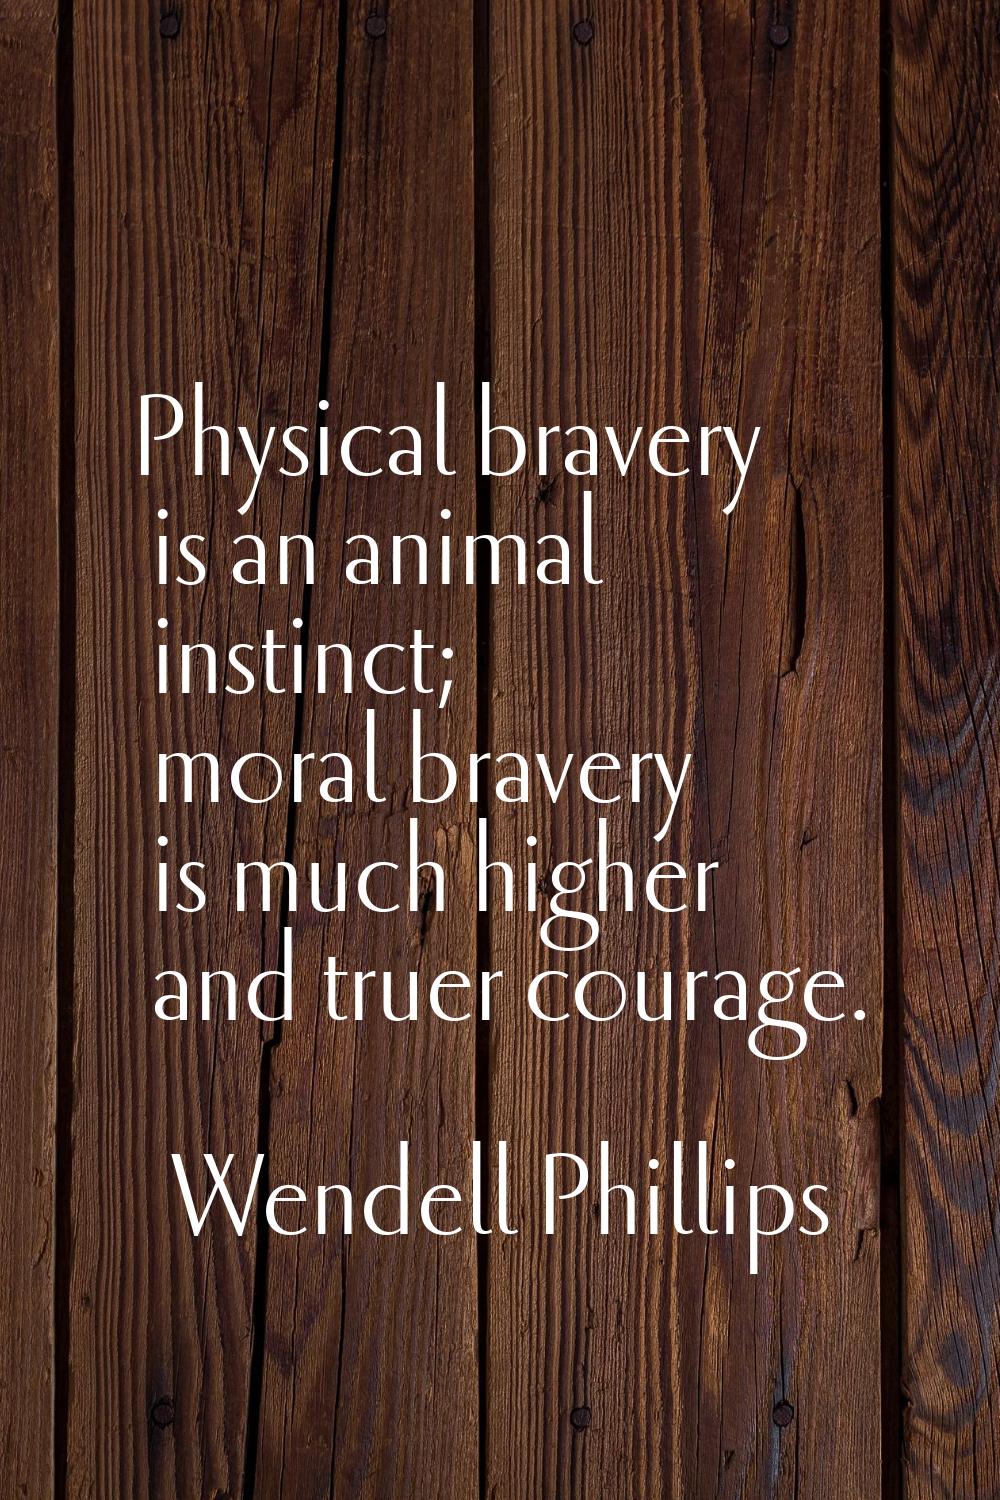 Physical bravery is an animal instinct; moral bravery is much higher and truer courage.